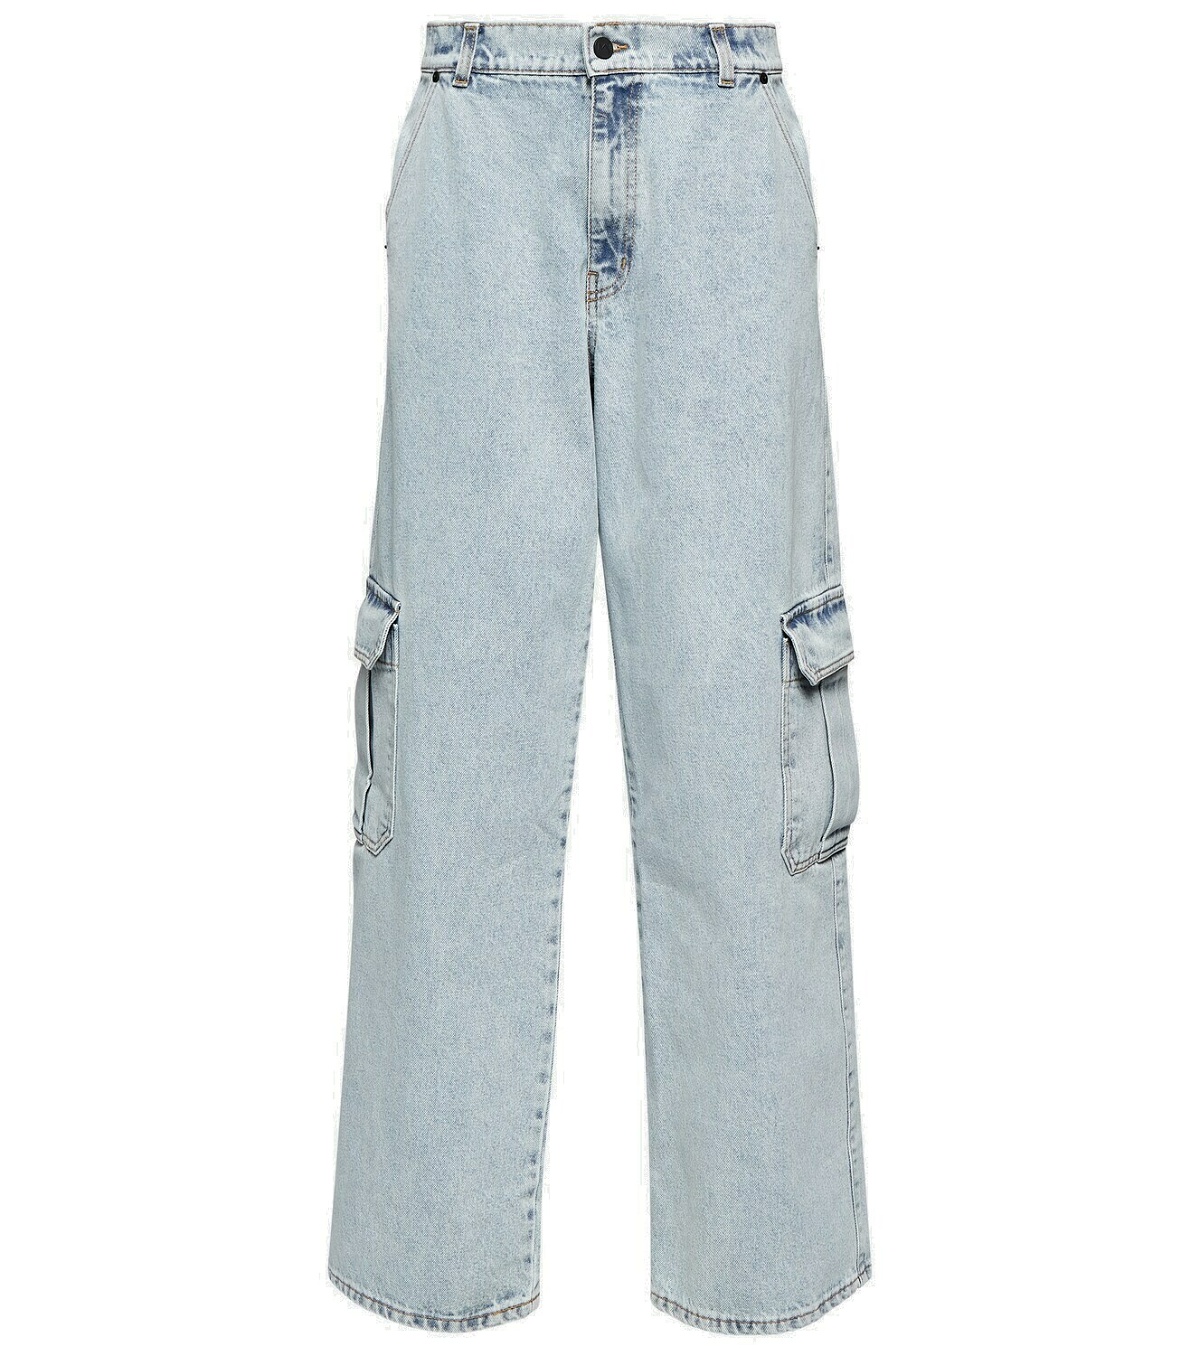 Photo: The Mannei Sado low-rise jeans